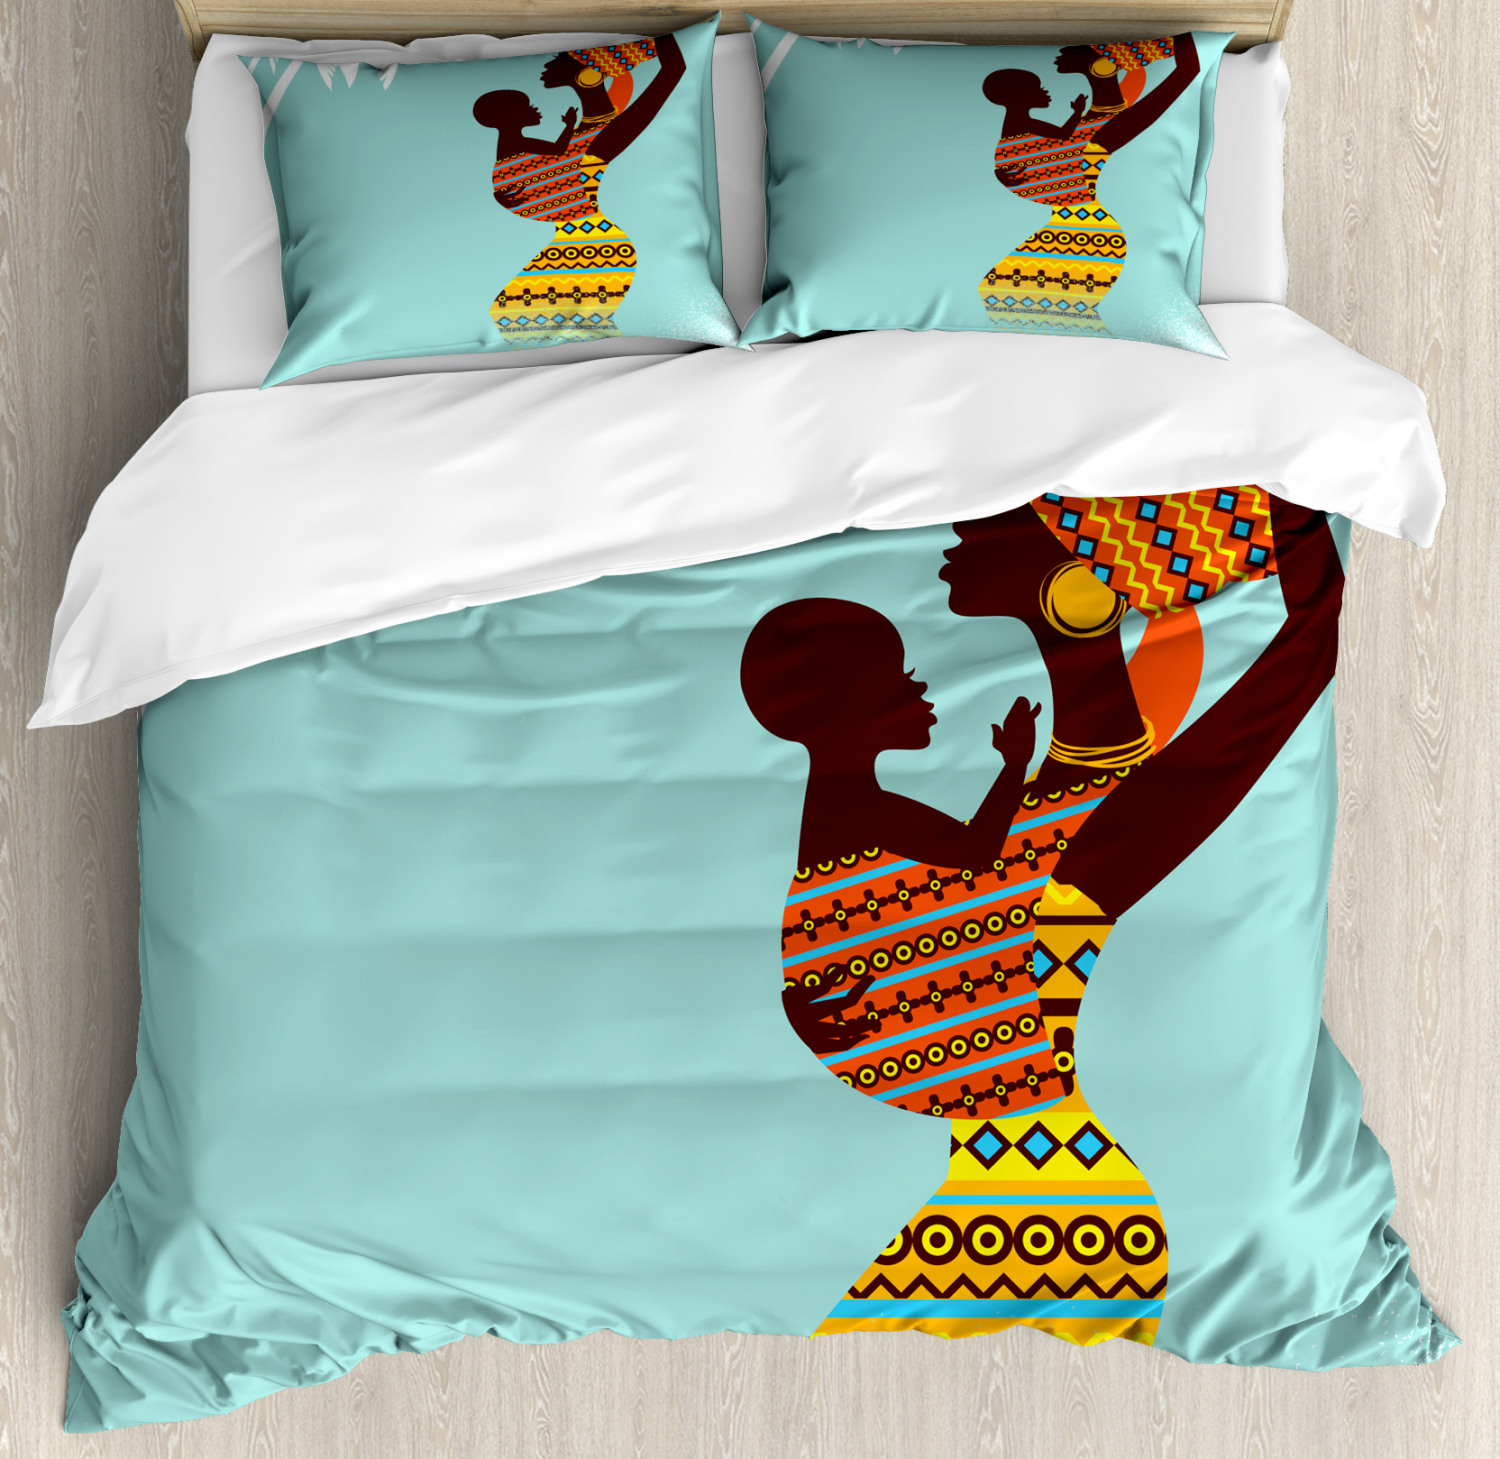 Retro Duvet Cover Set With Pillow Shams African Ethnic Mother